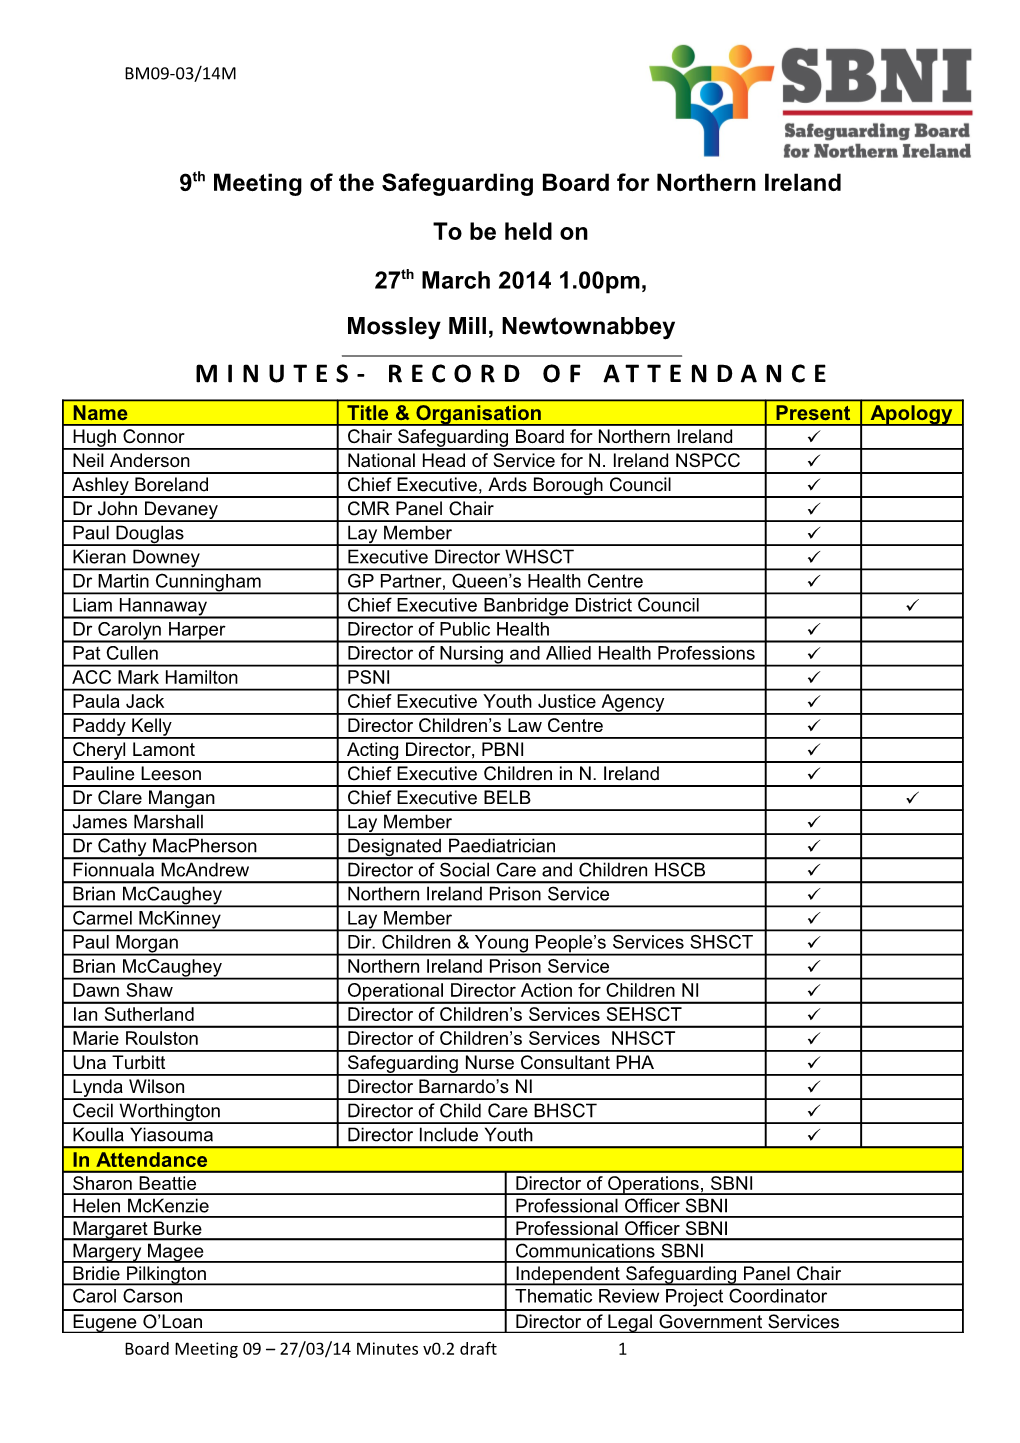 Minutes- Record of Attendance